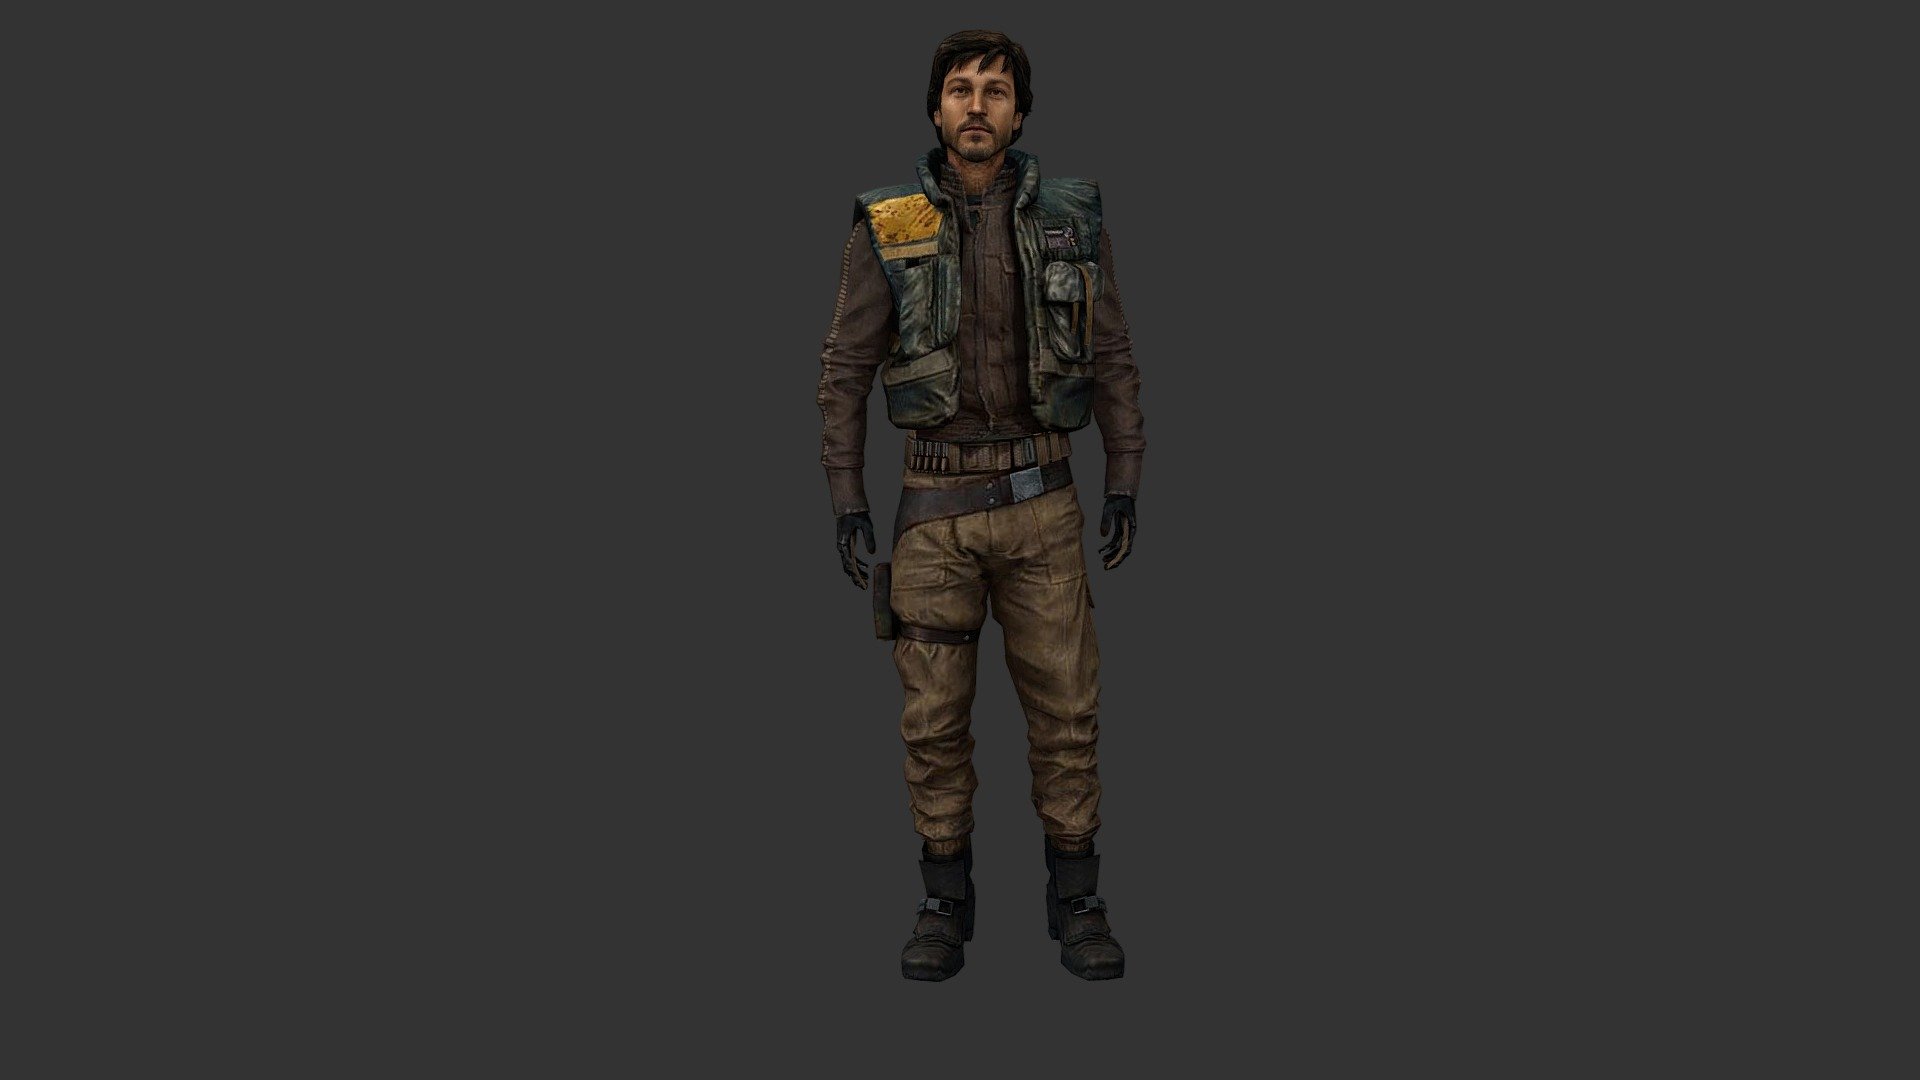 An accomplished Alliance Intelligence officer with combat field experience

Cassian Andor is just one of the many Star Wars exhibits that can be seen in the Star Wars Virtual Museum.

Download the Star Wars Virtual Museum here:

http://www.starwarsvirtualmuseum.com - Cassian Andor - 3D model by Mind Mulch for The Masses (@mindmulchforthemasses) 3d model